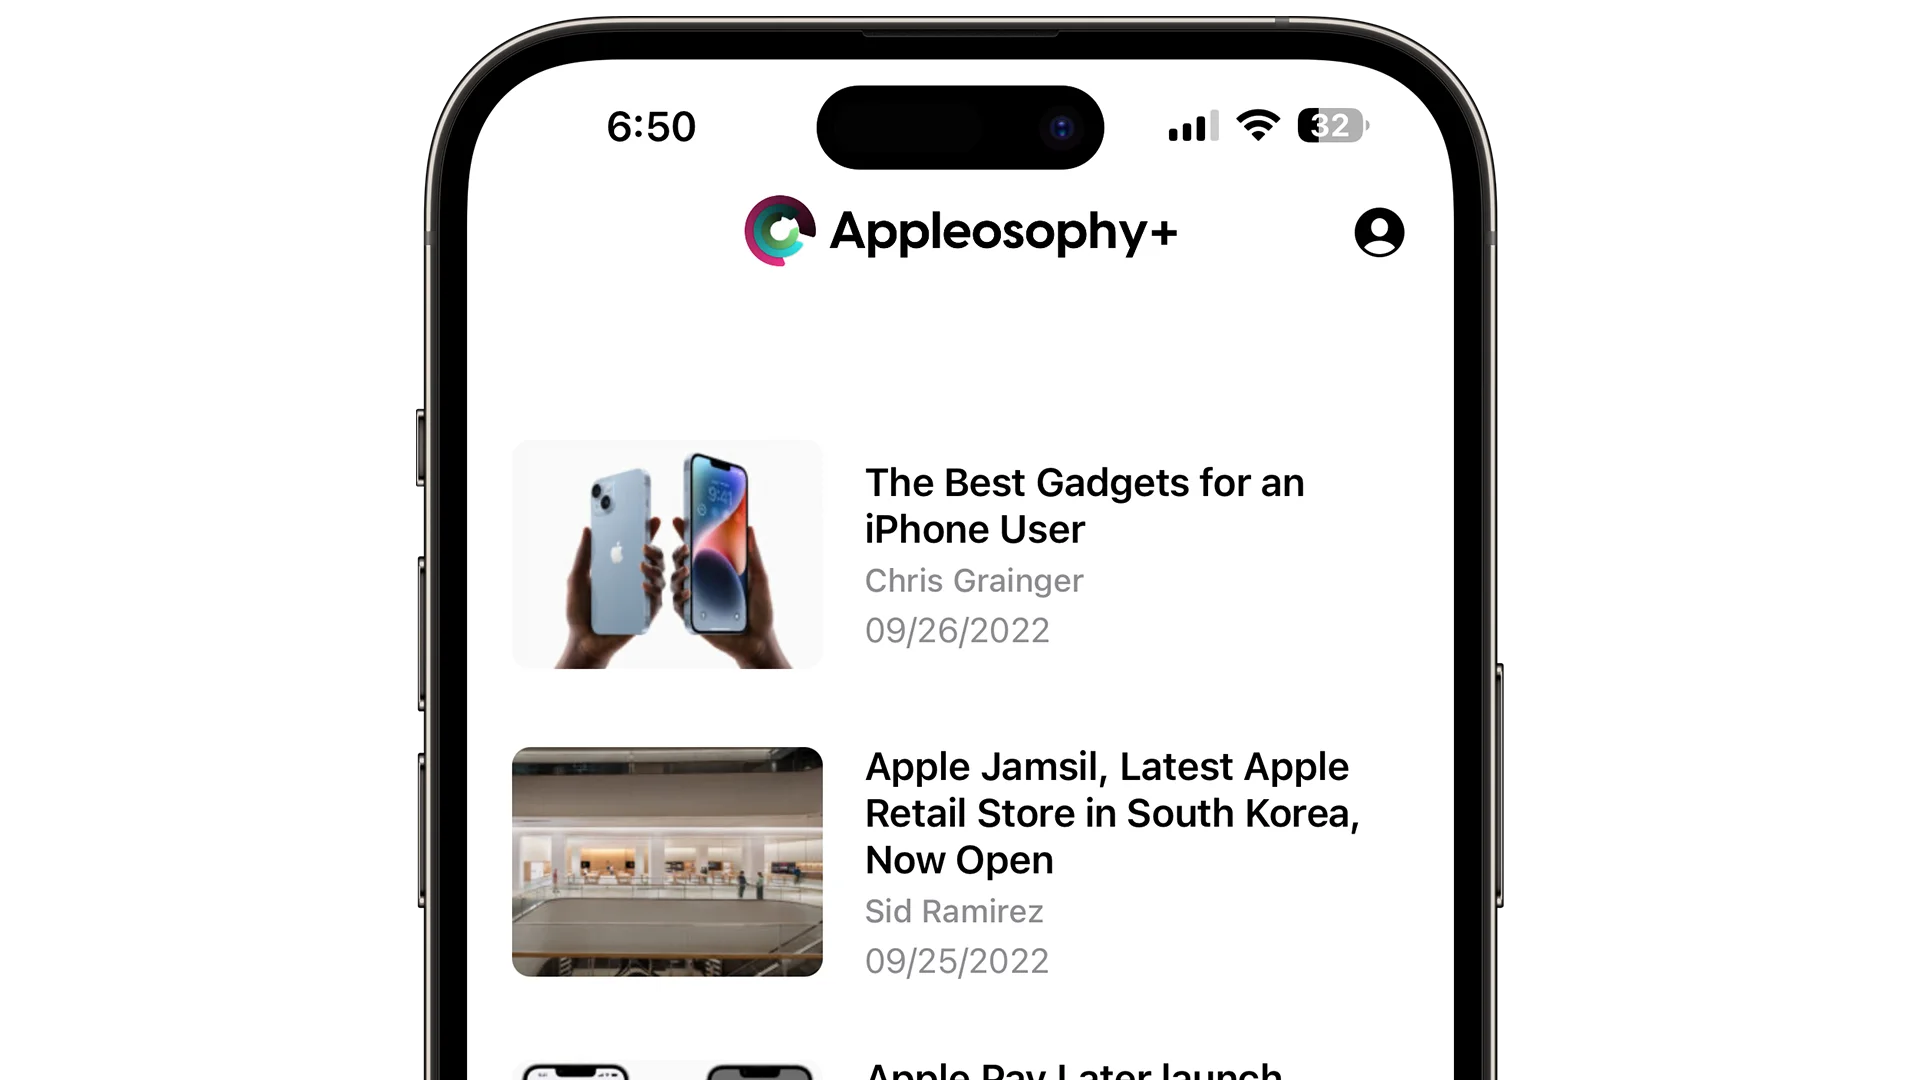 Appleosophy | Appleosophy App launches on the App Store today